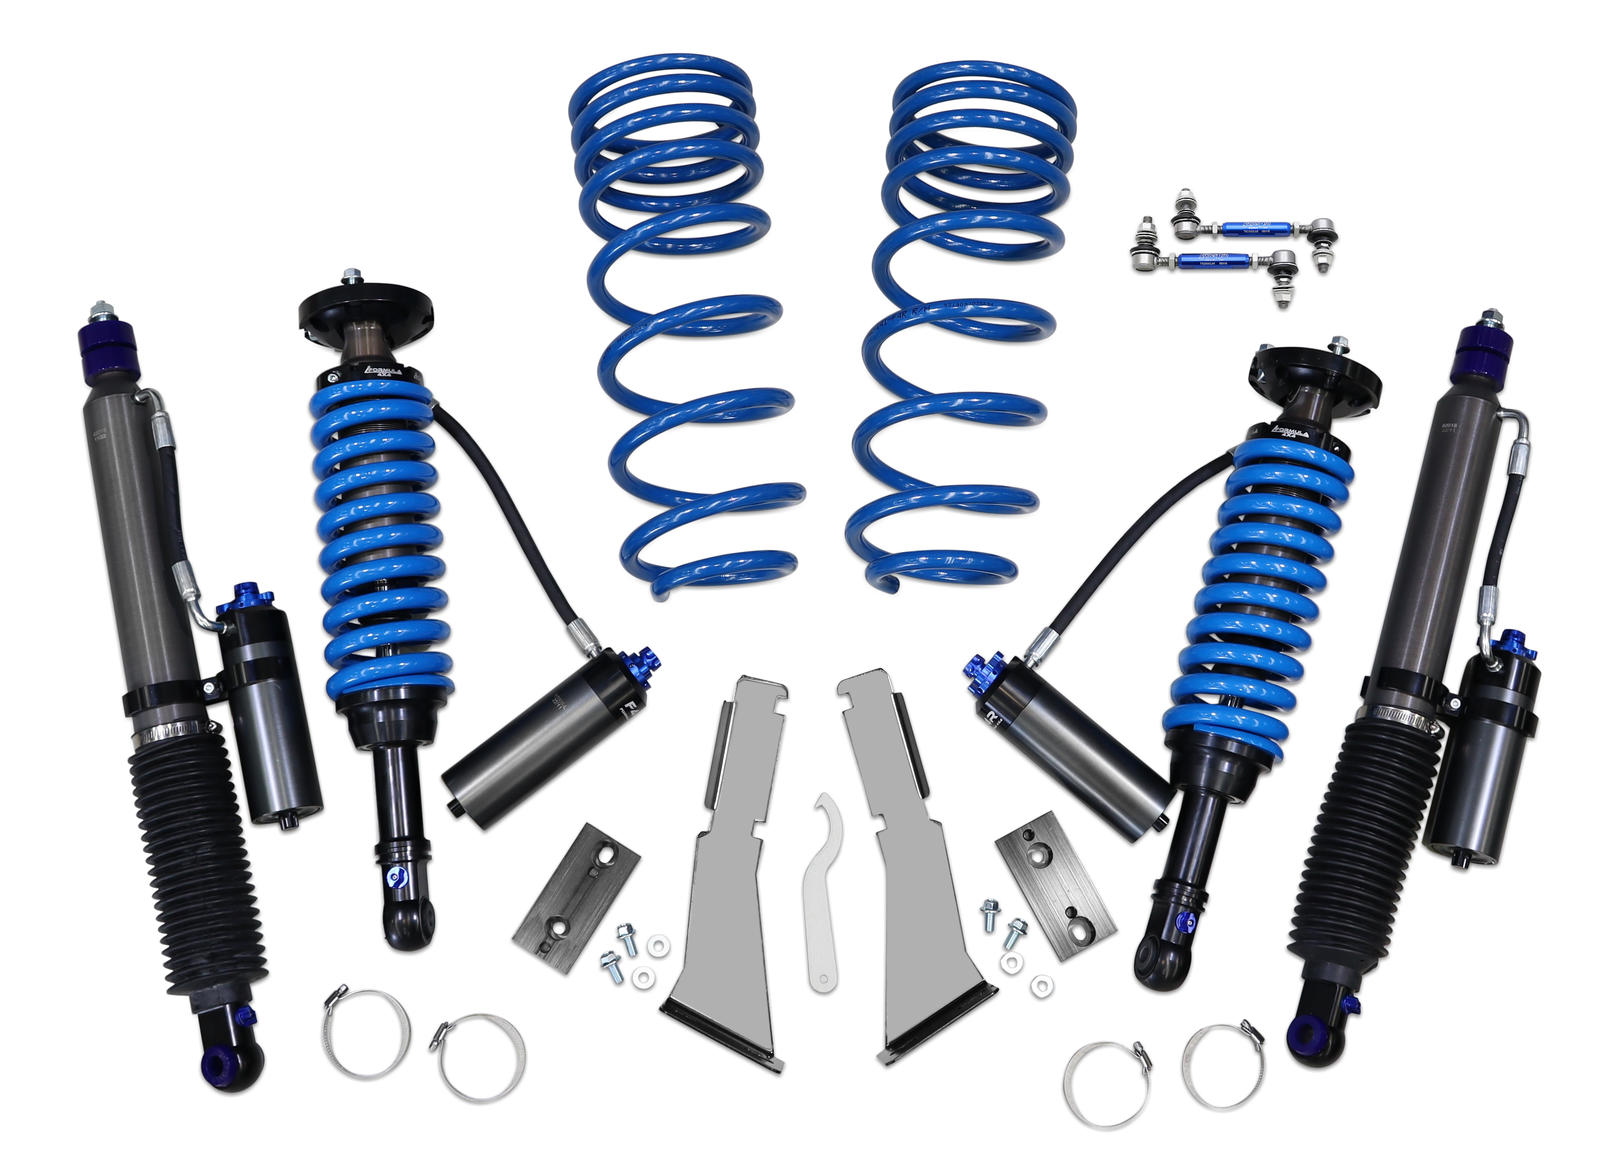 2-3 Inch Adjustable F4R Formula 4x4 Lift Kit to suit Toyota LandCruiser 300 Series 2021-on